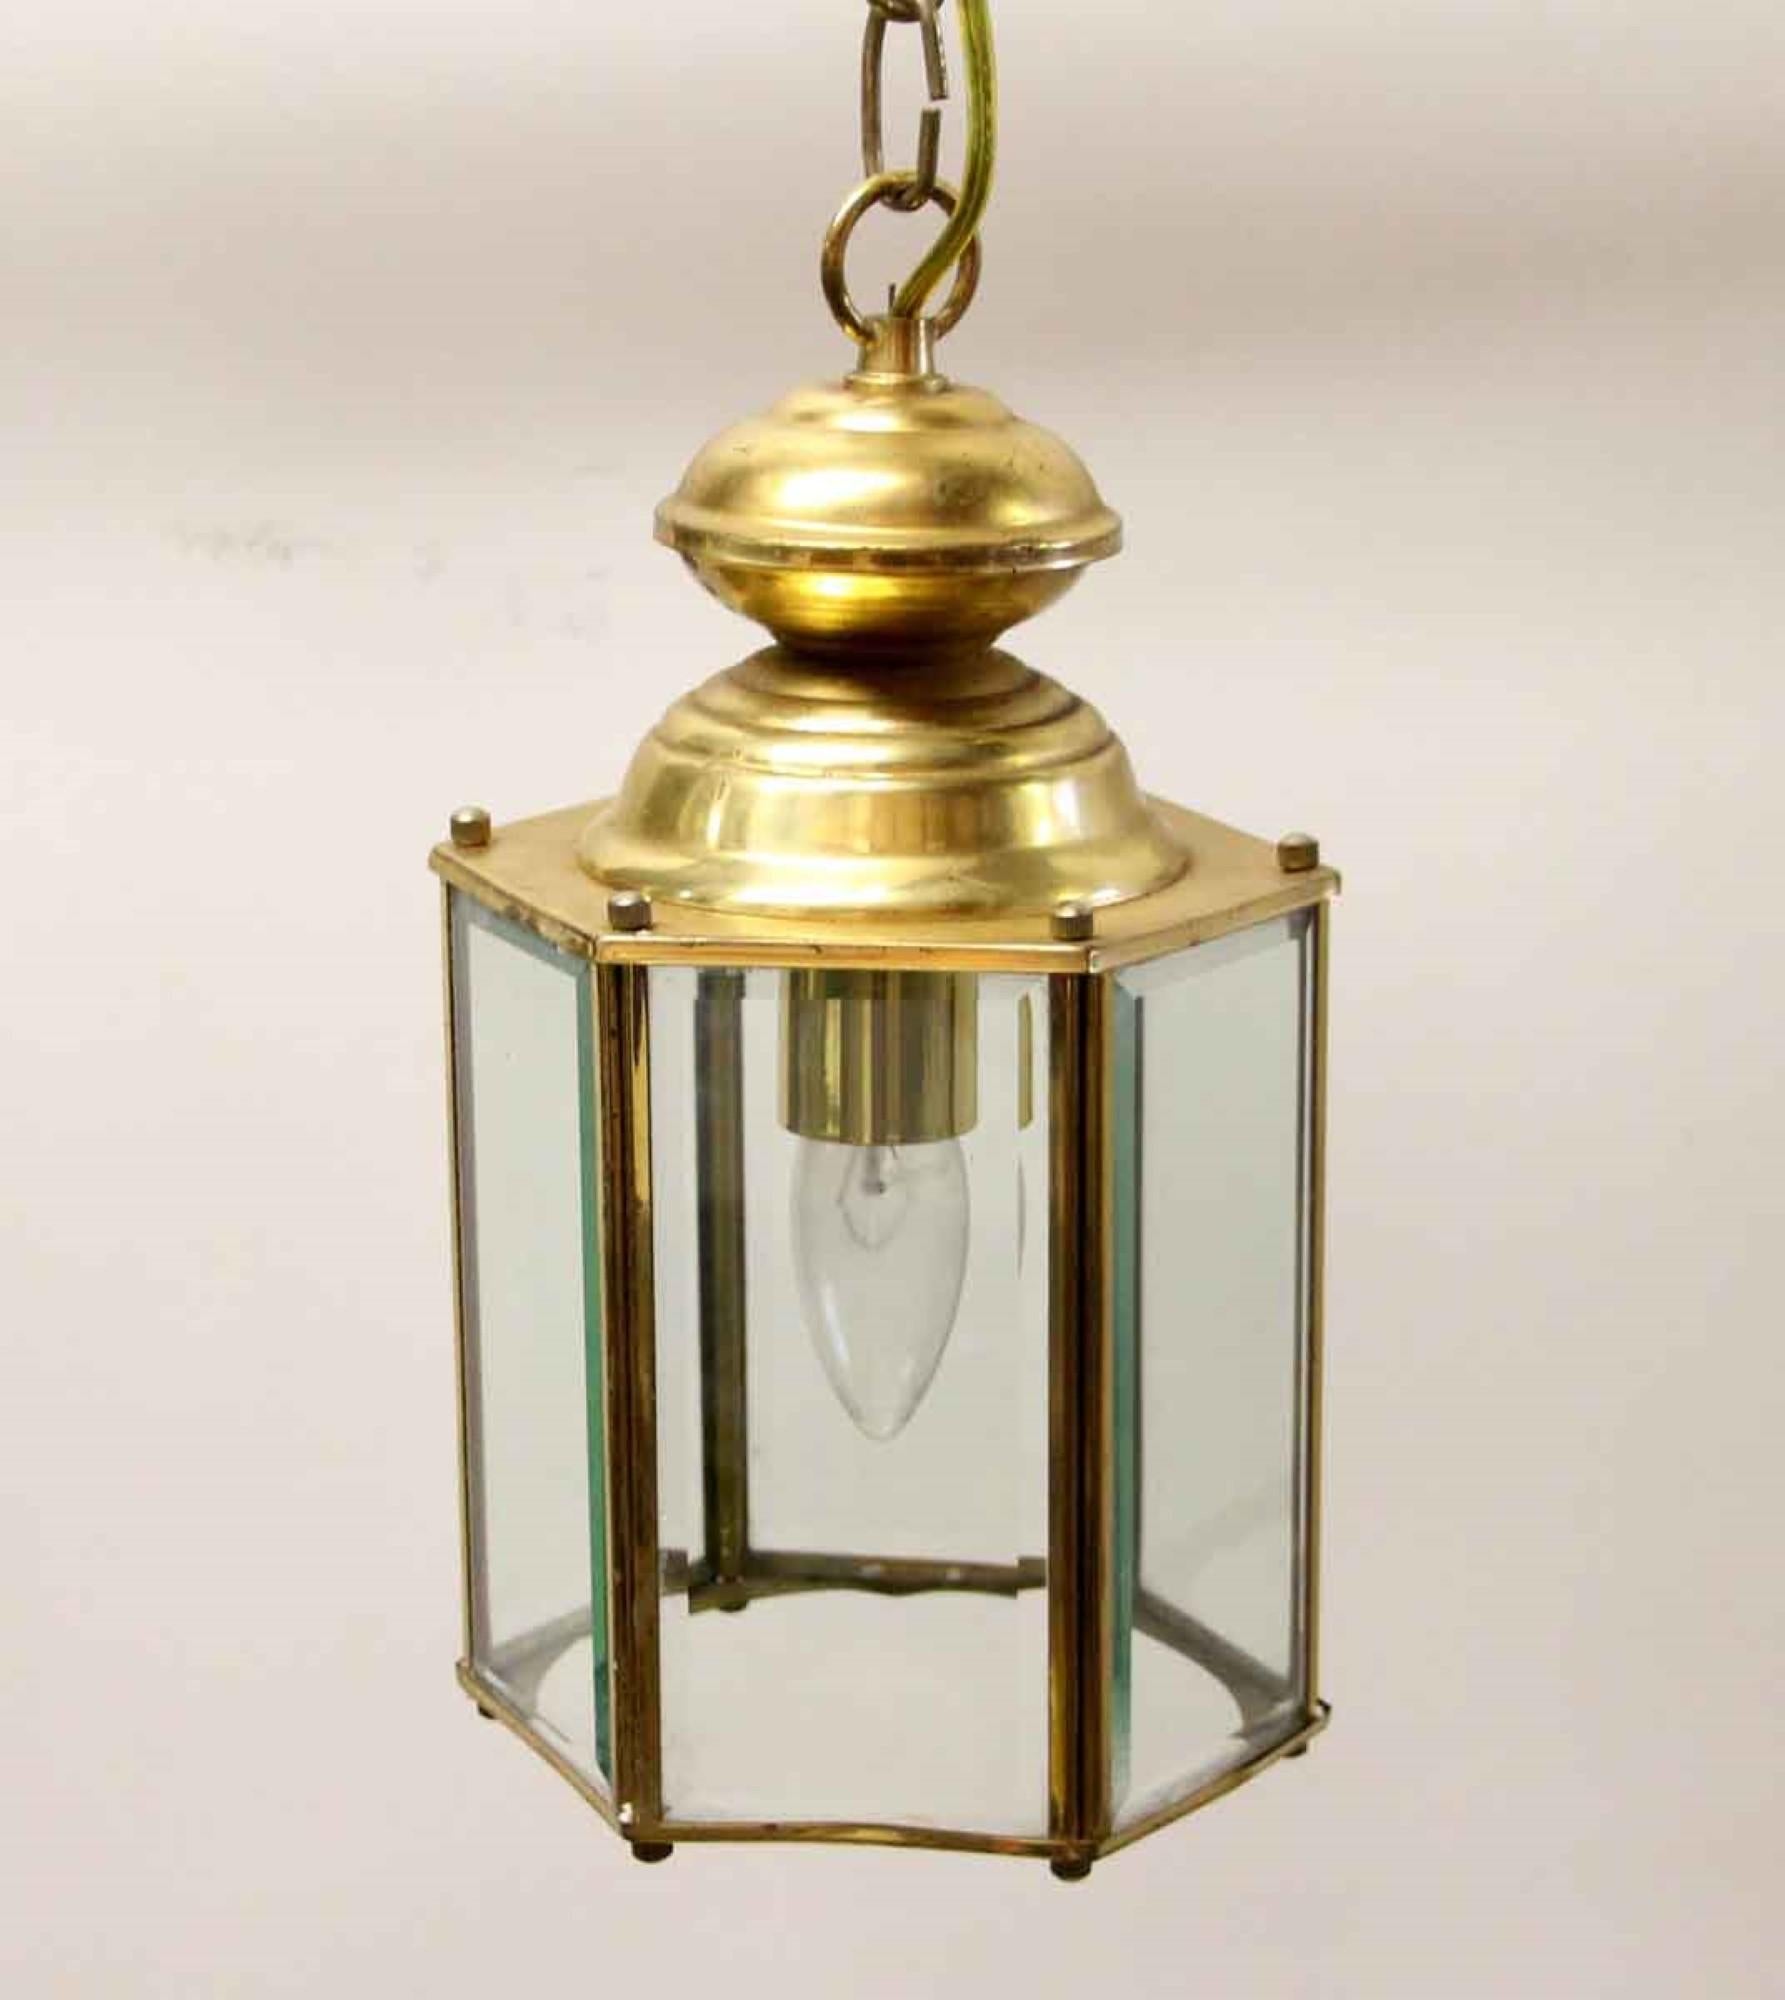 1970s hexagon shaped pendant lantern with beveled glass with brass hardware. This can be seen at our 400 Gilligan St location in Scranton. PA.